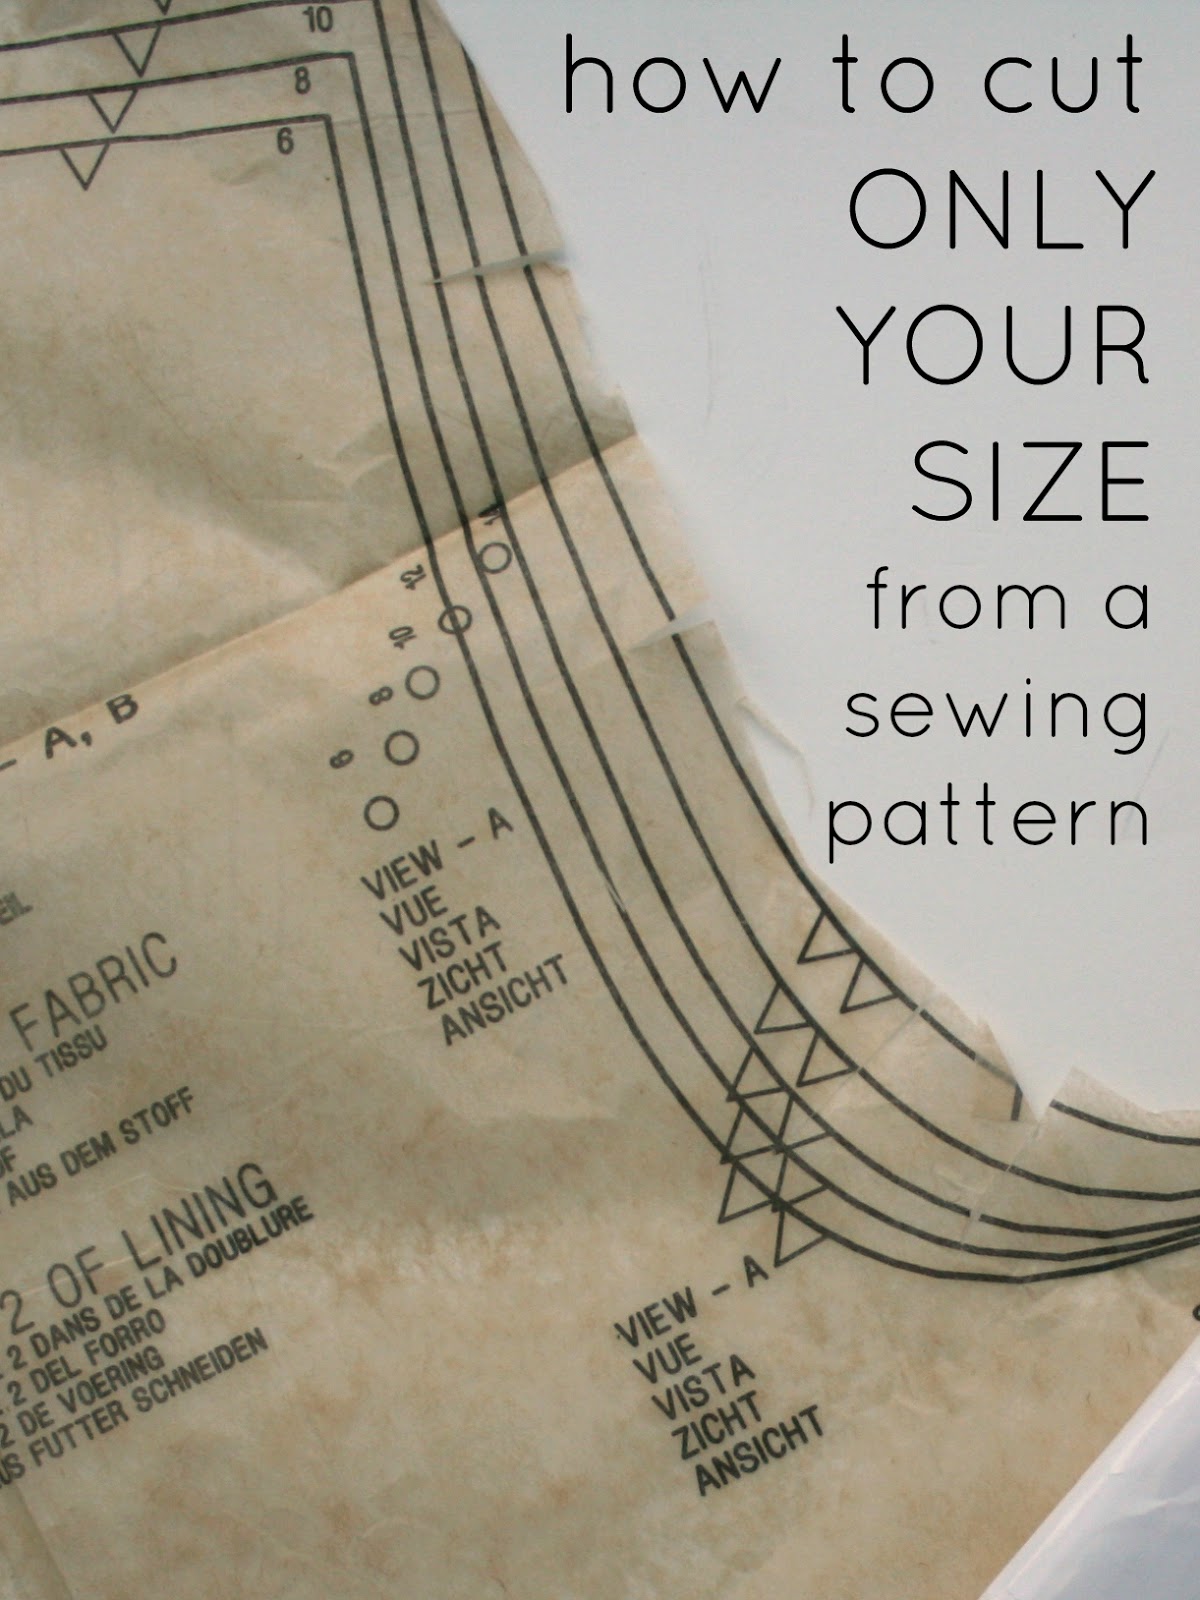 How and When to Use Interfacing on Your Sewing Projects